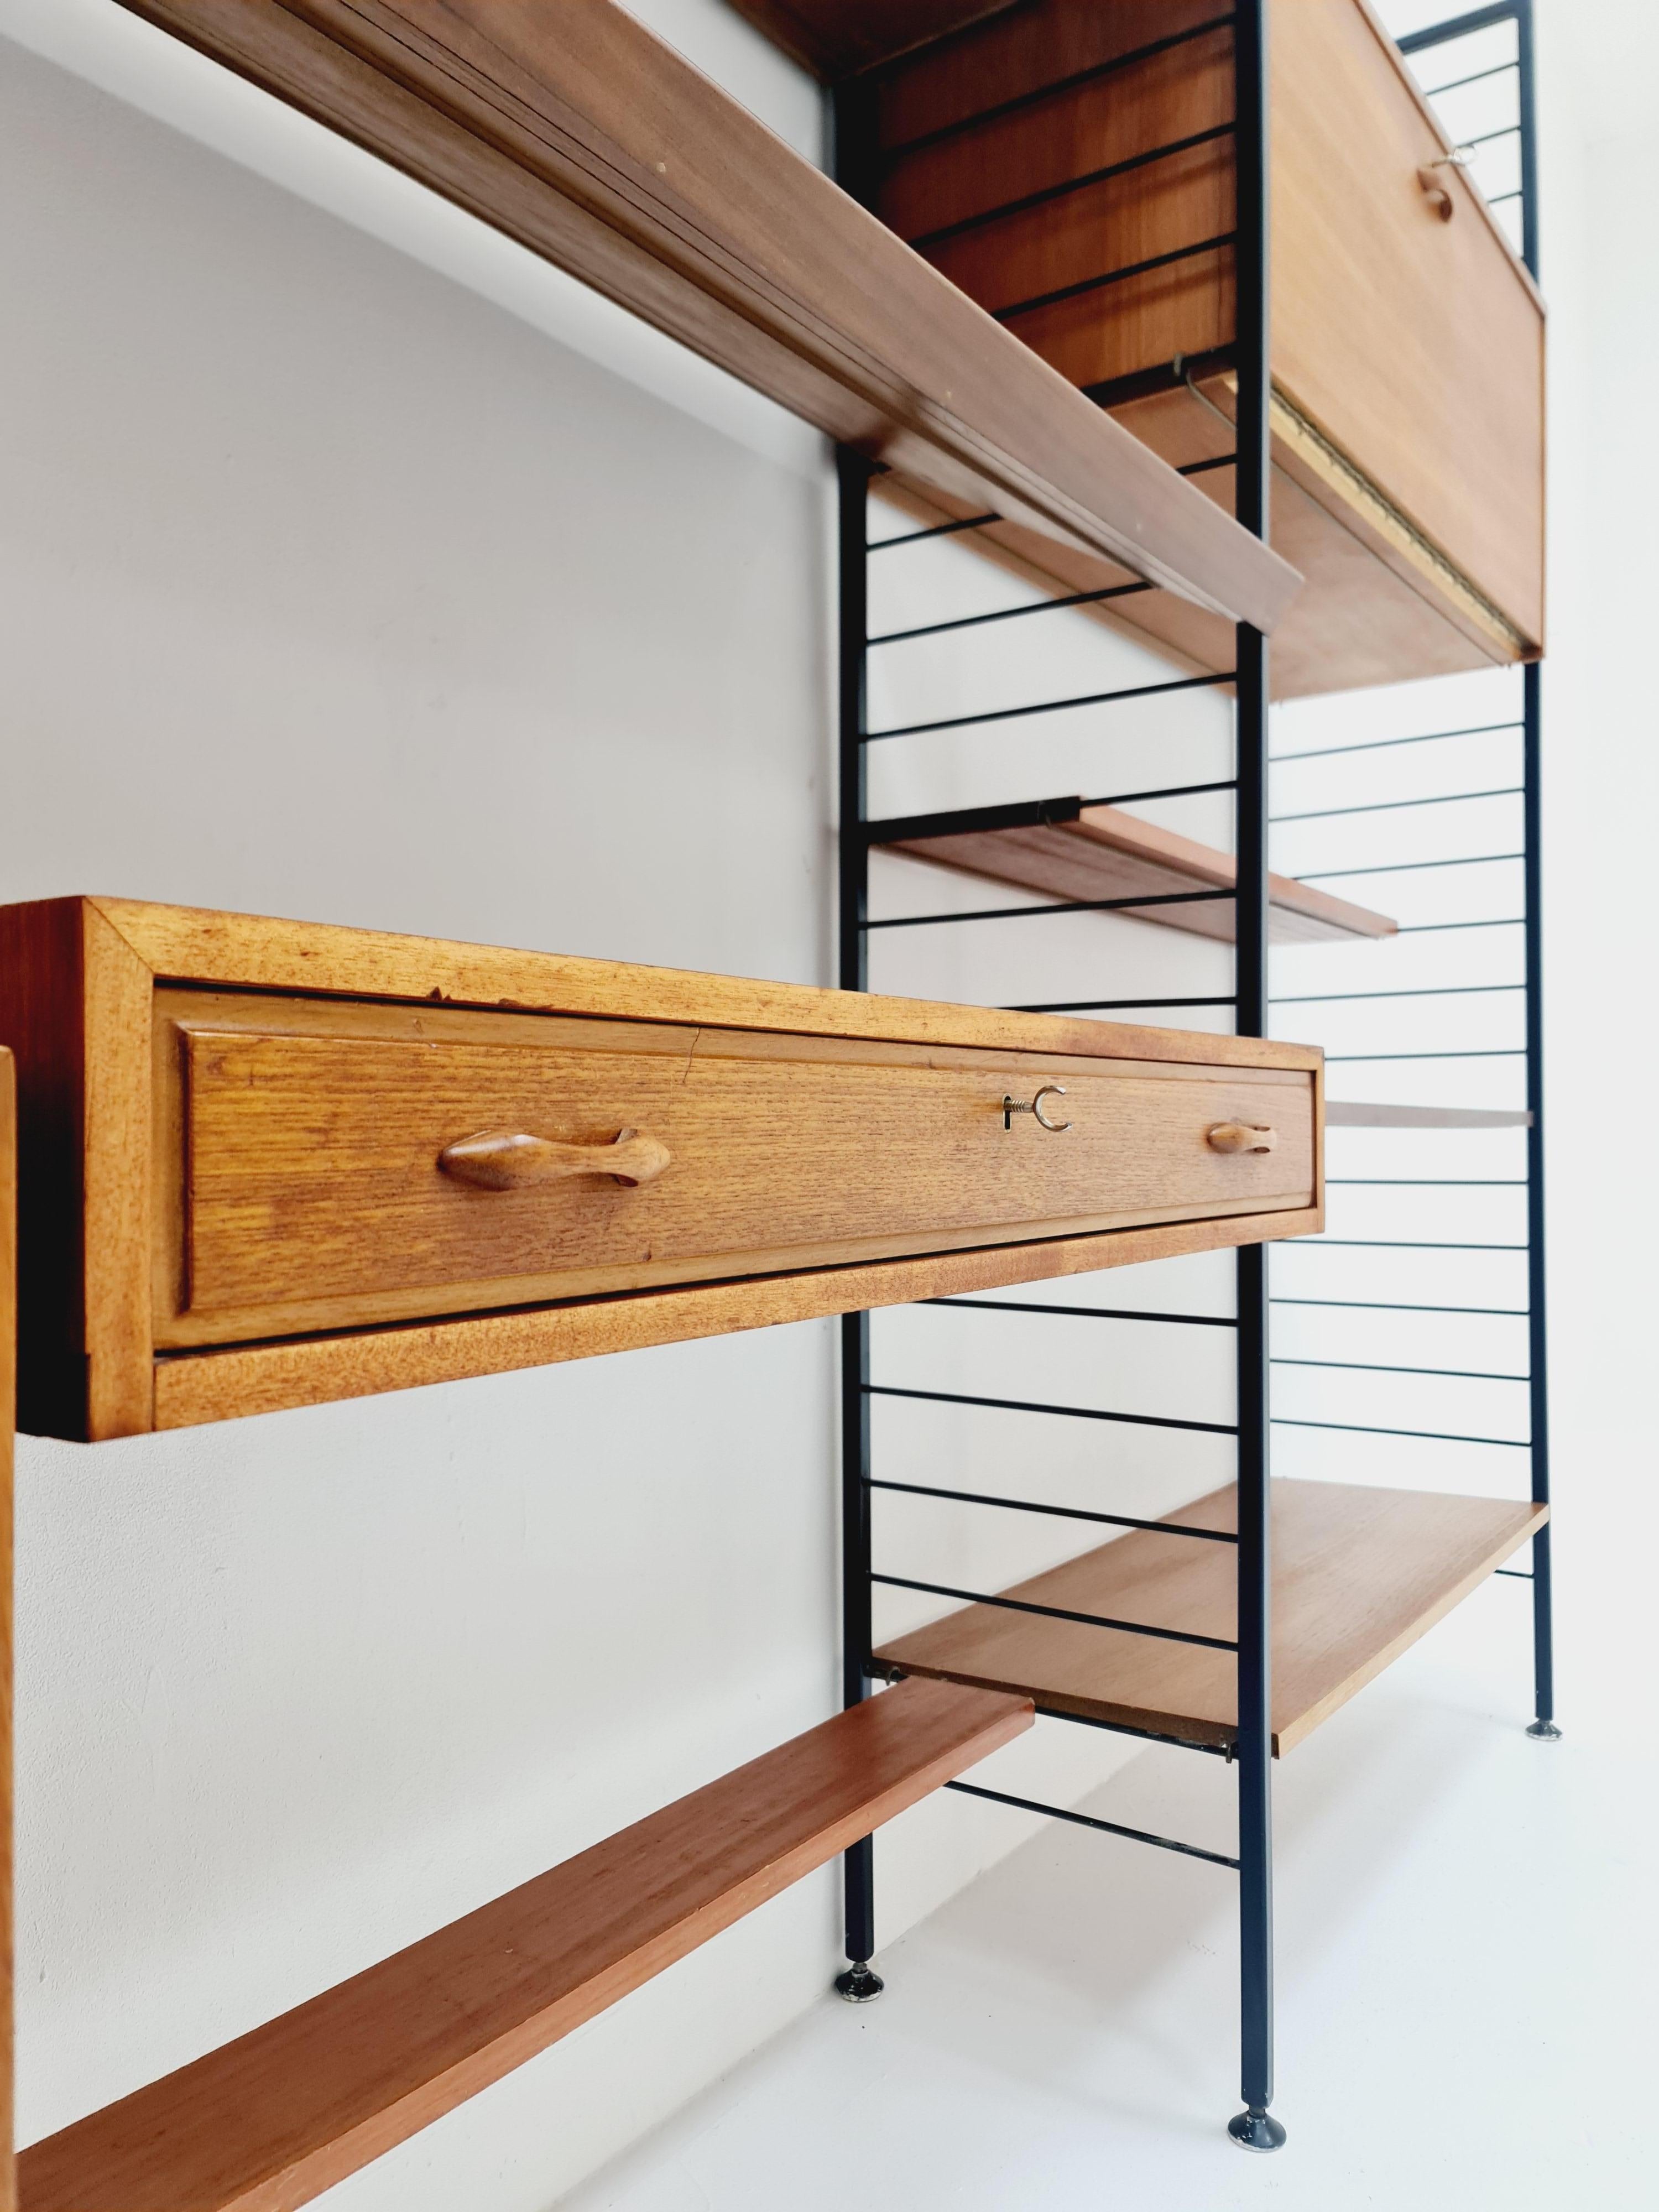 Mid-20th Century Free standing Mid century modular unit shelving system by Staples Ladderax